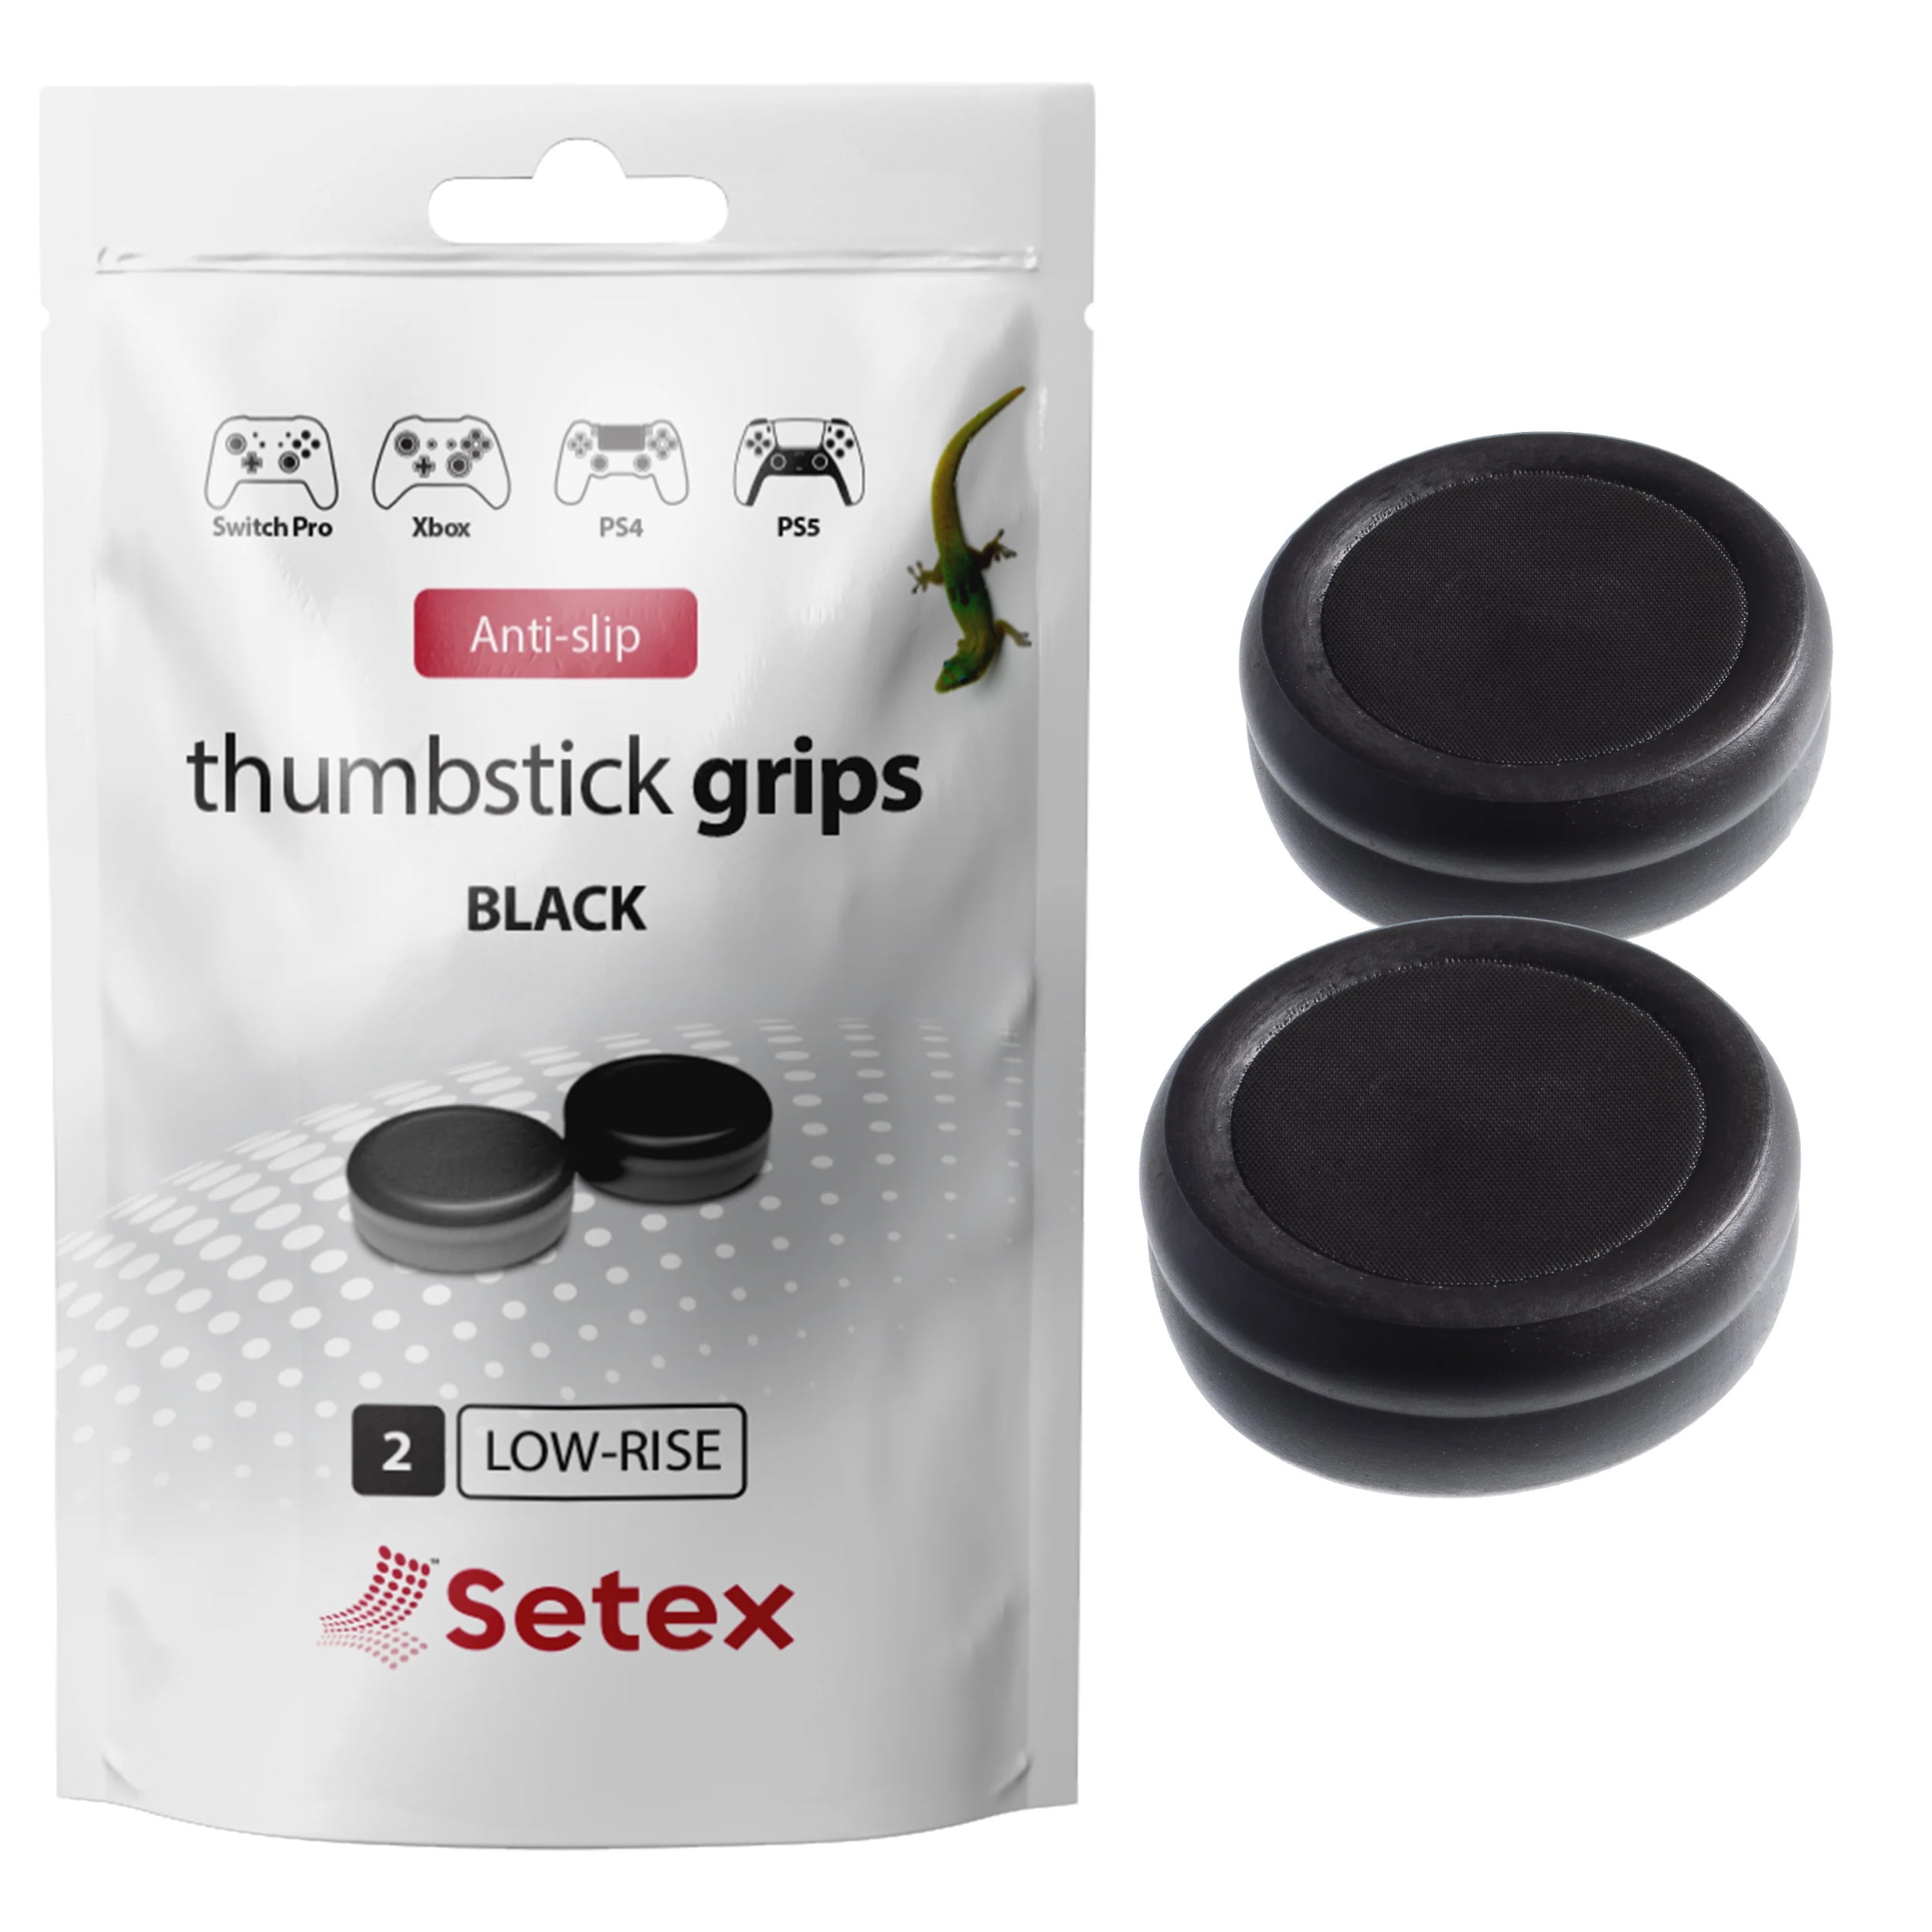 Setex Gecko Grip, Thumbstick Grip Covers, for Playstation PS5, PS4, Xbox  One, Switch Pro, Steam Deck, Anti-Slip Microstructured Analog Stick Thumb  Grips, (1 Pair) Black, Grip Covers Only 